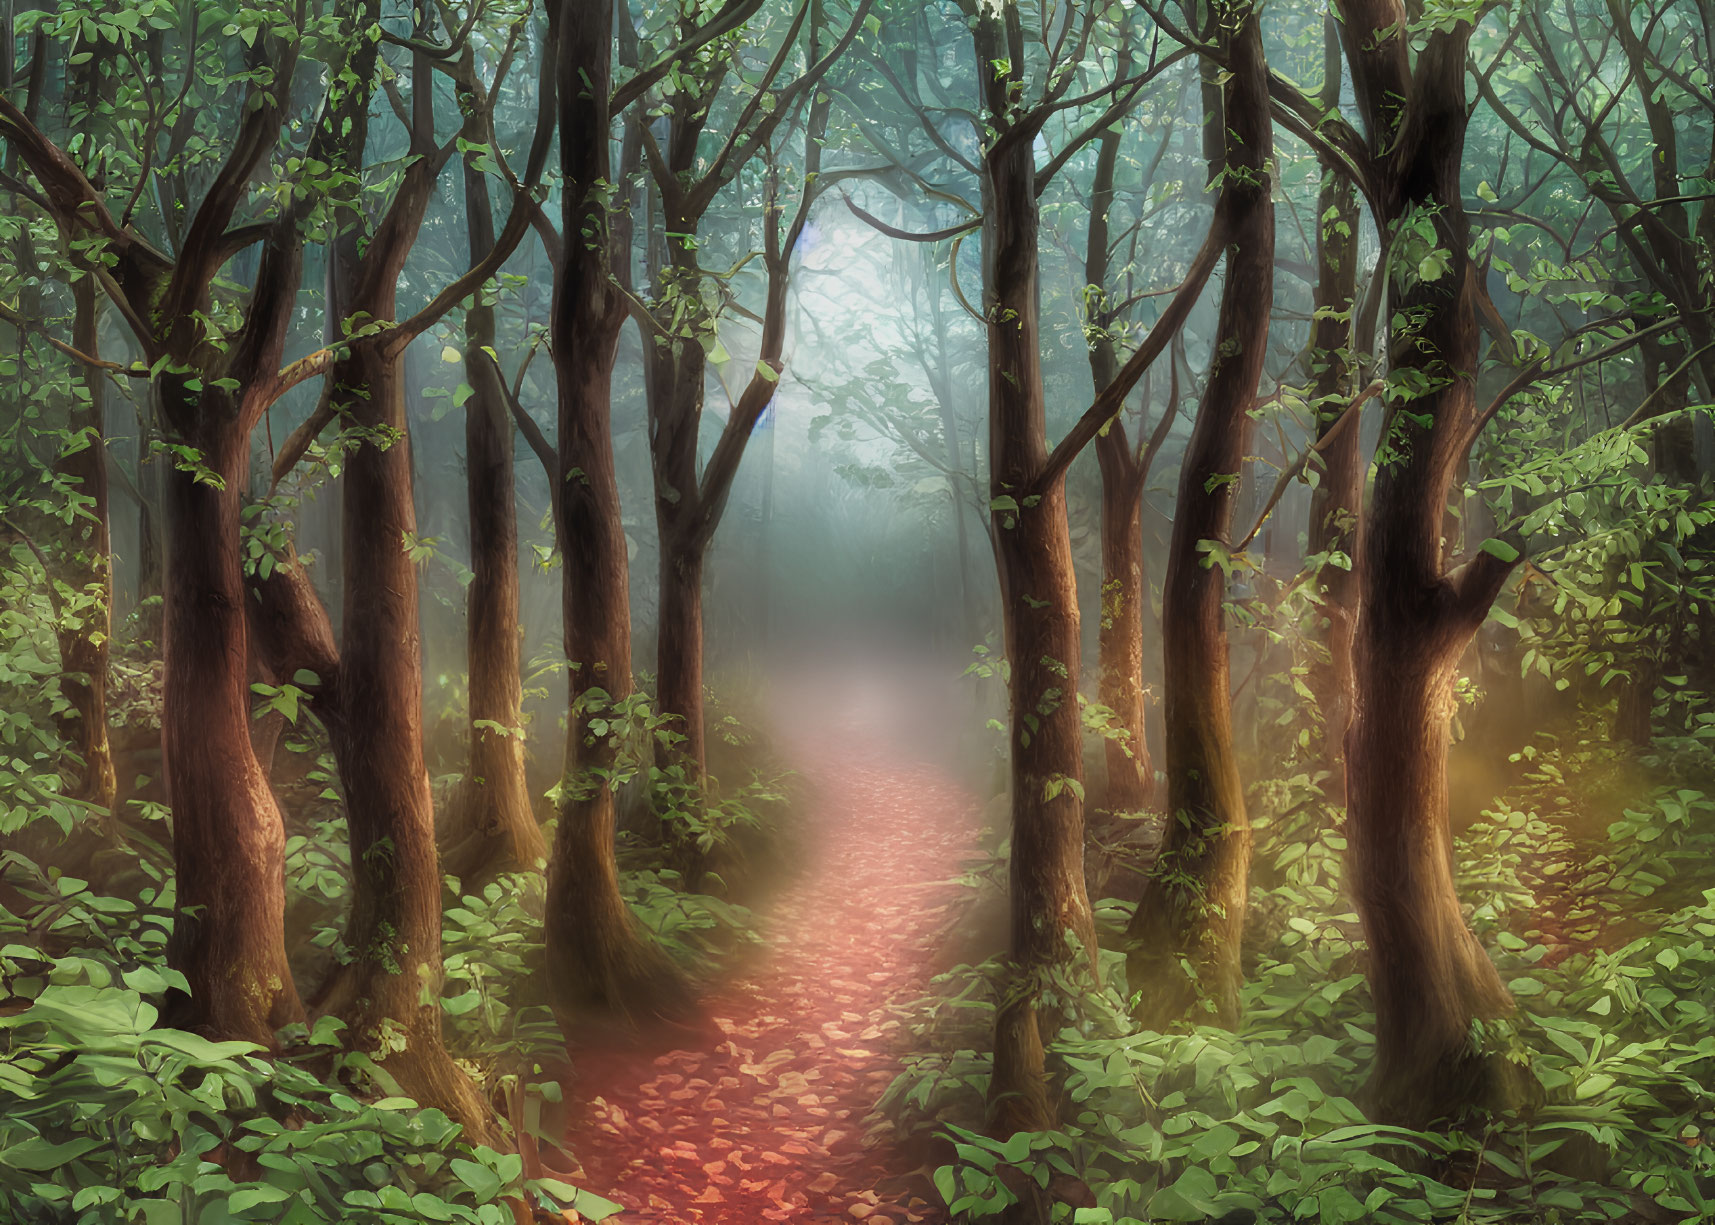 Misty forest path with sunlight filtering through canopy